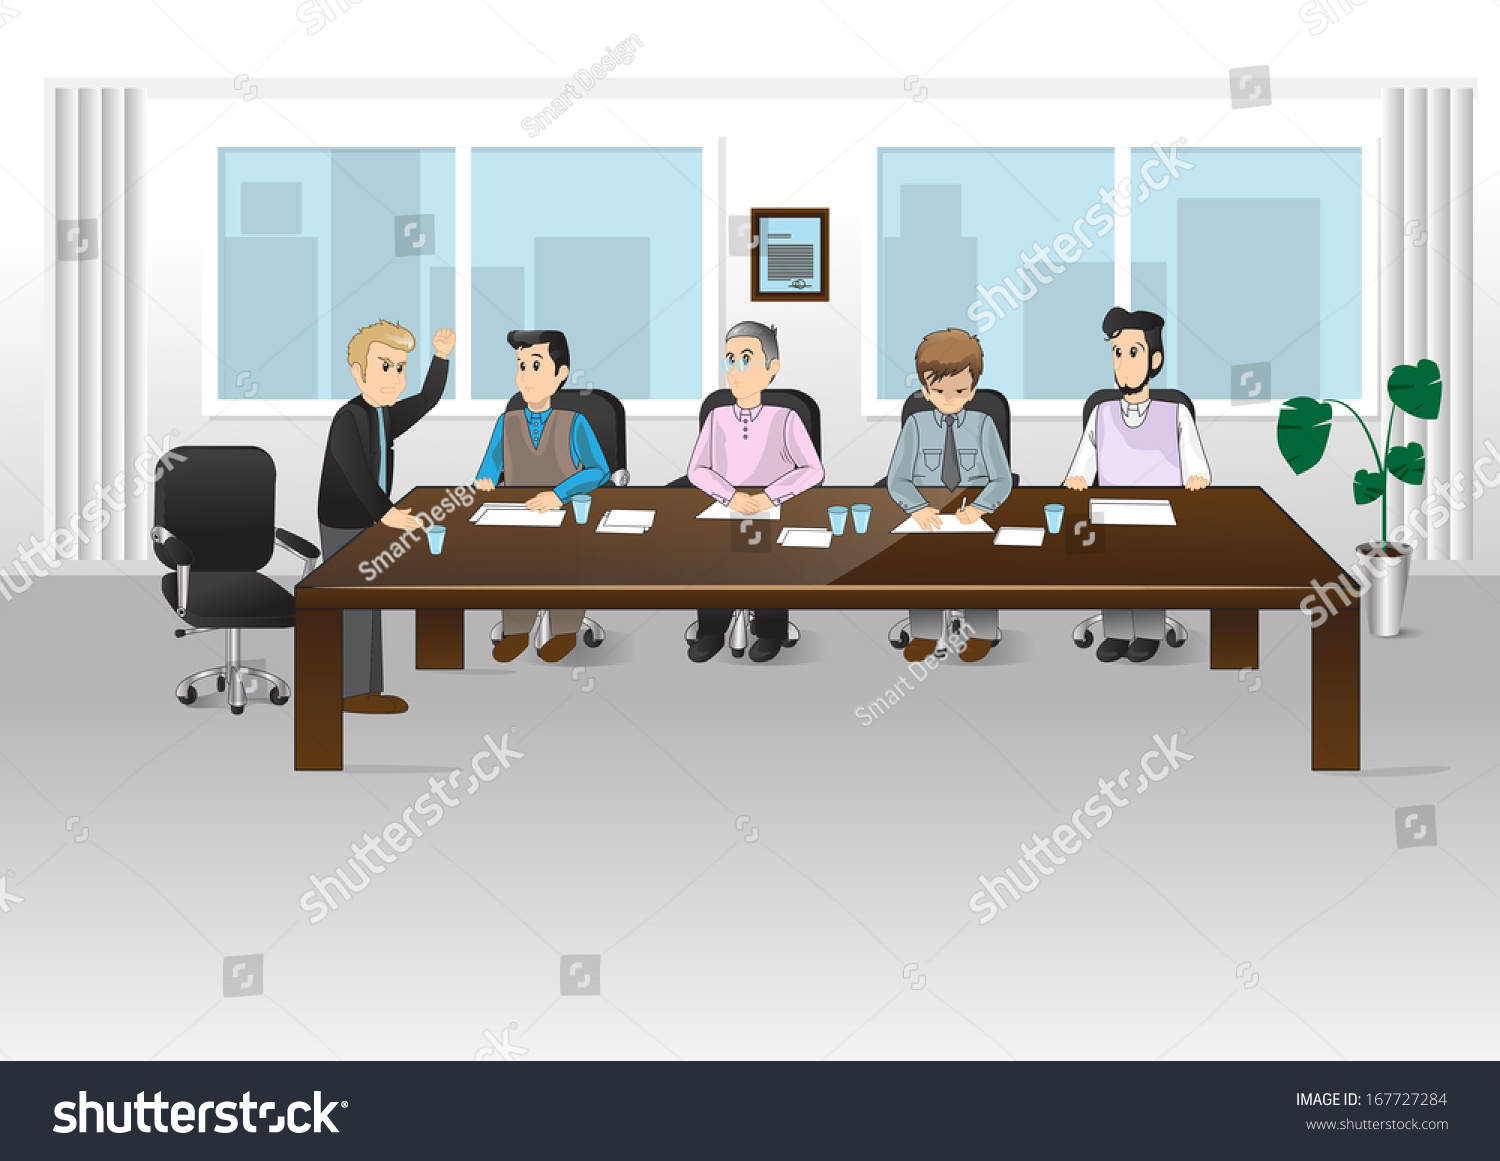 free clipart meeting room - photo #47